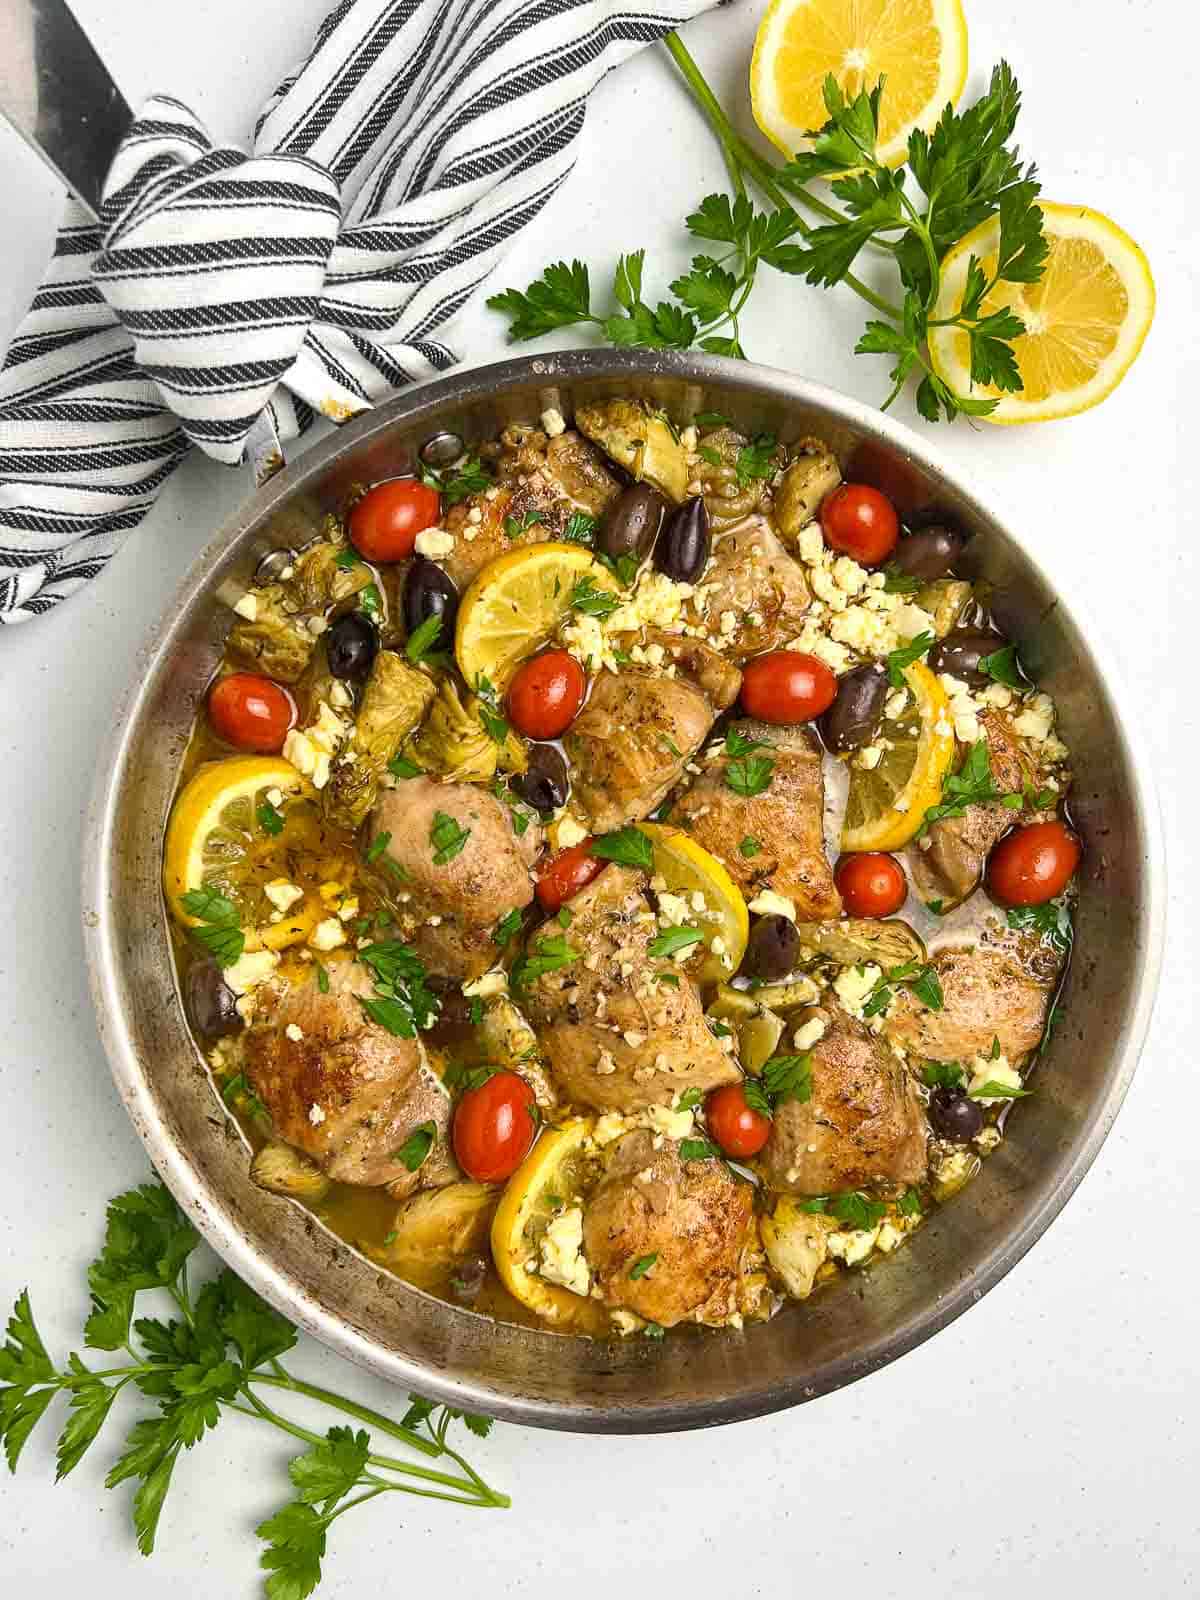 Baked Lemon Artichoke Chicken with olives and tomatoes in a skillet.